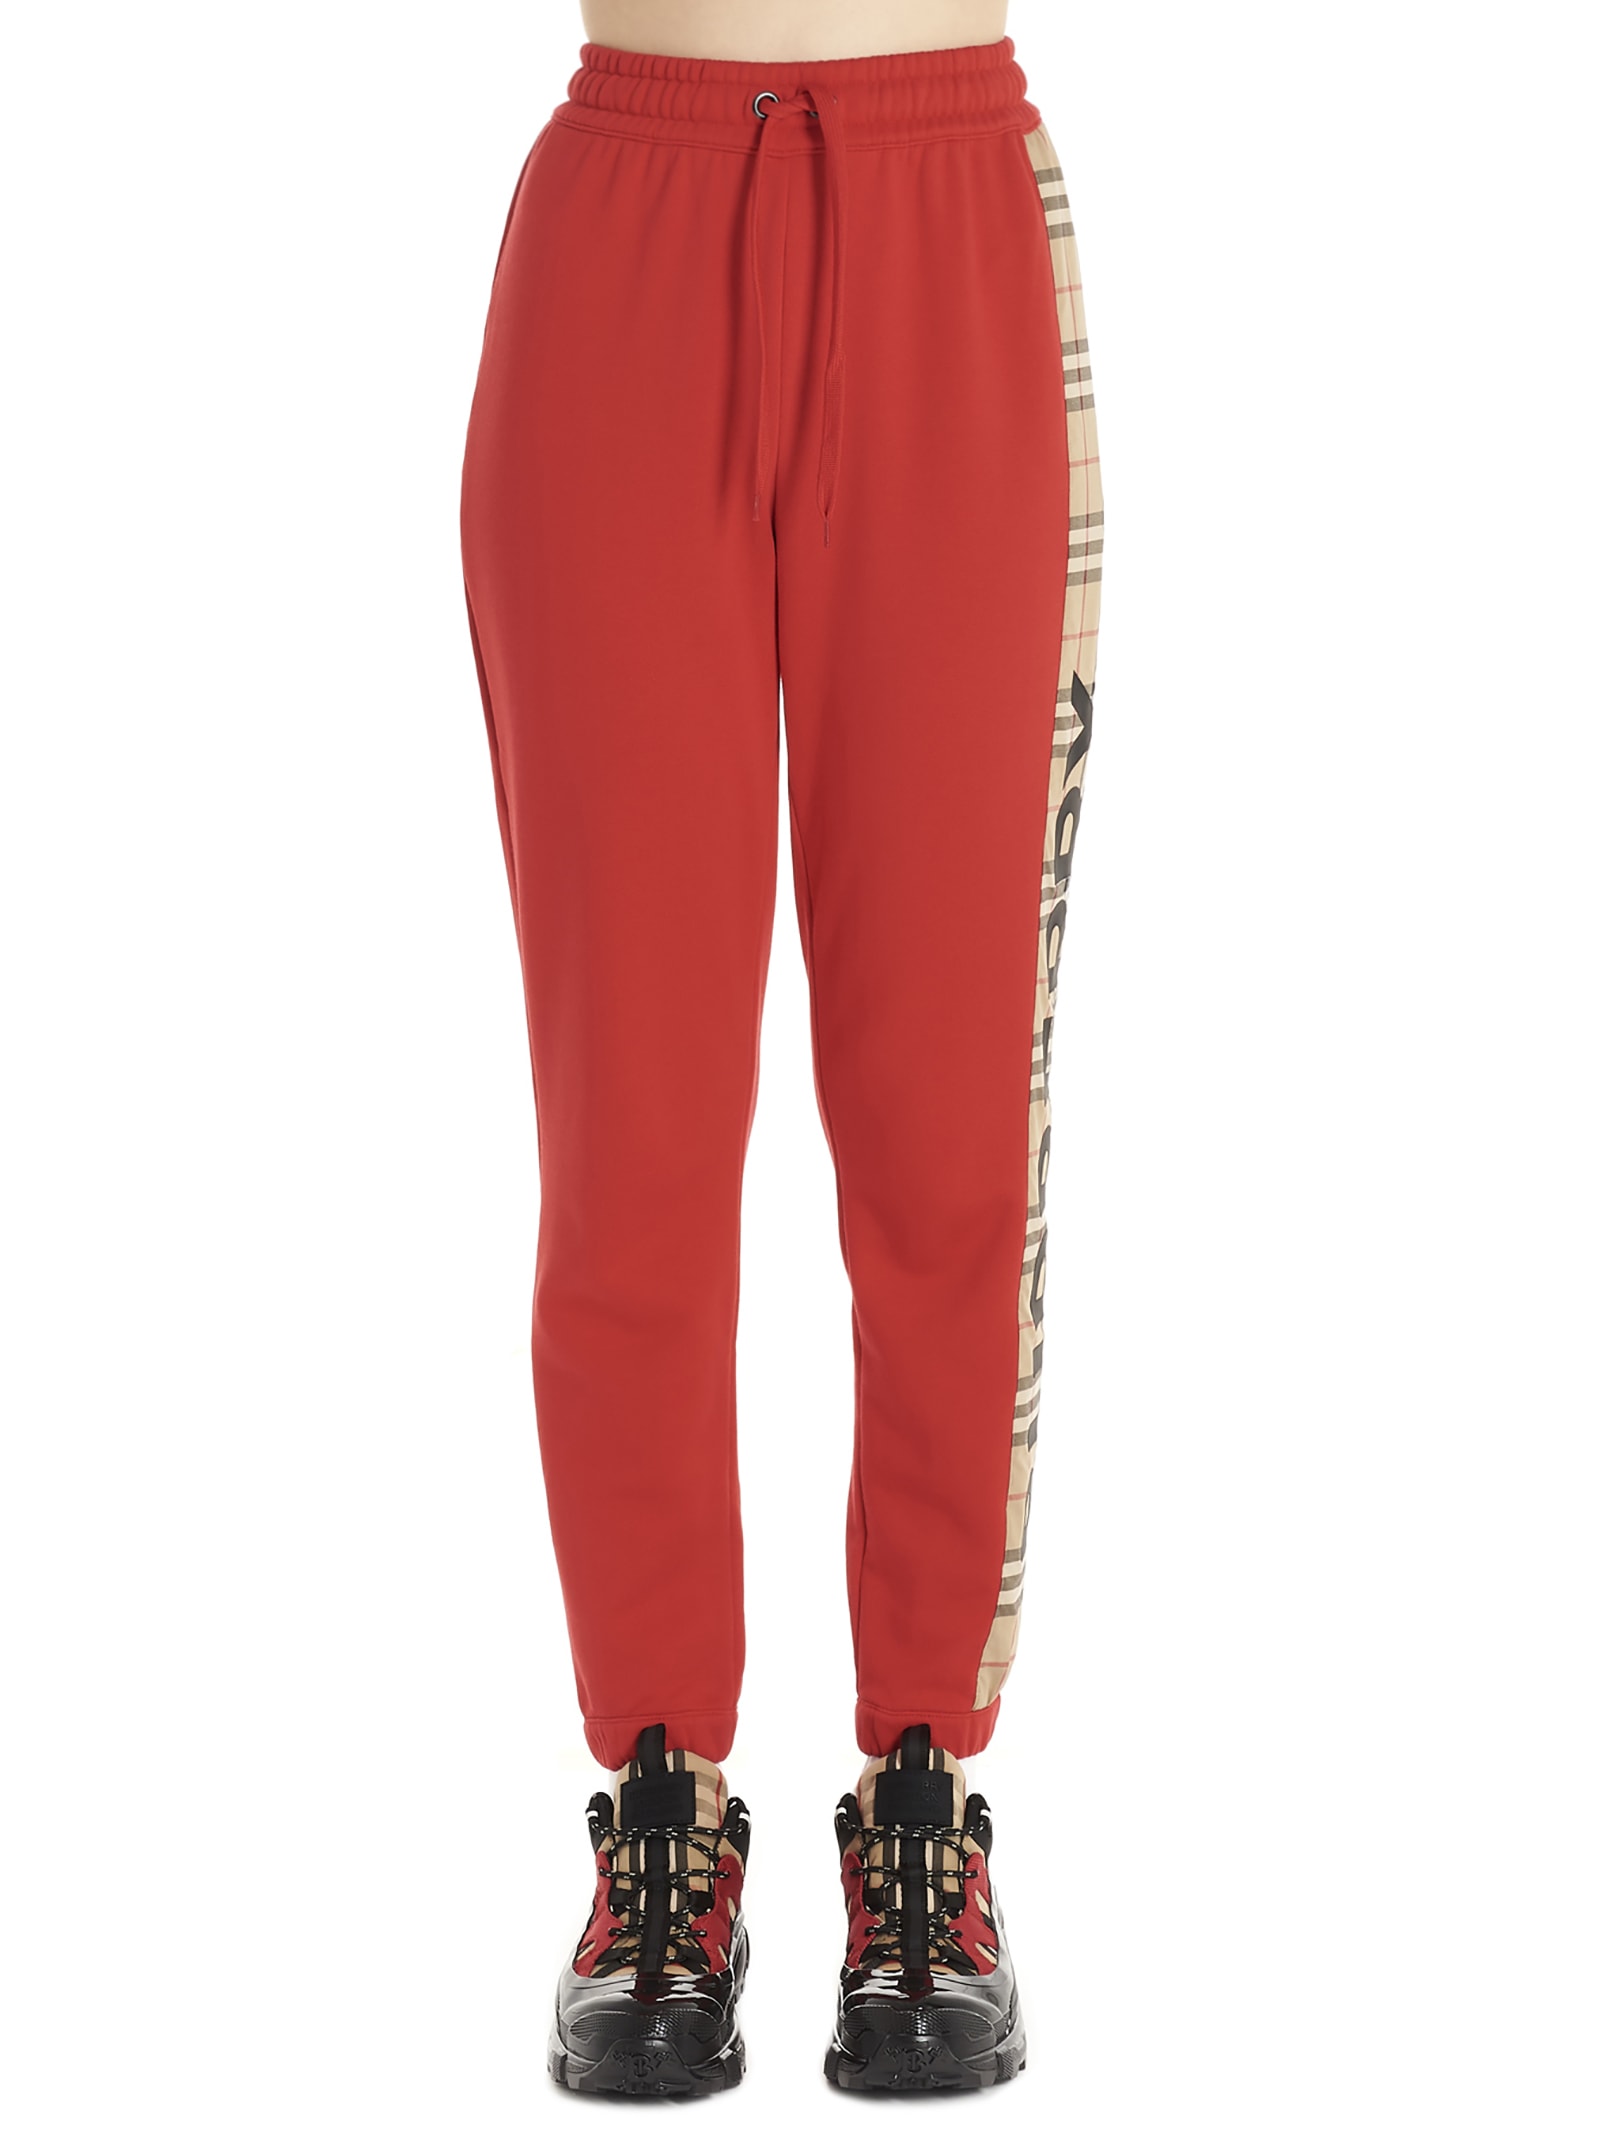 BURBERRY BURBERRY RAINE SWEATtrousers,8024955 BRIGHTRED